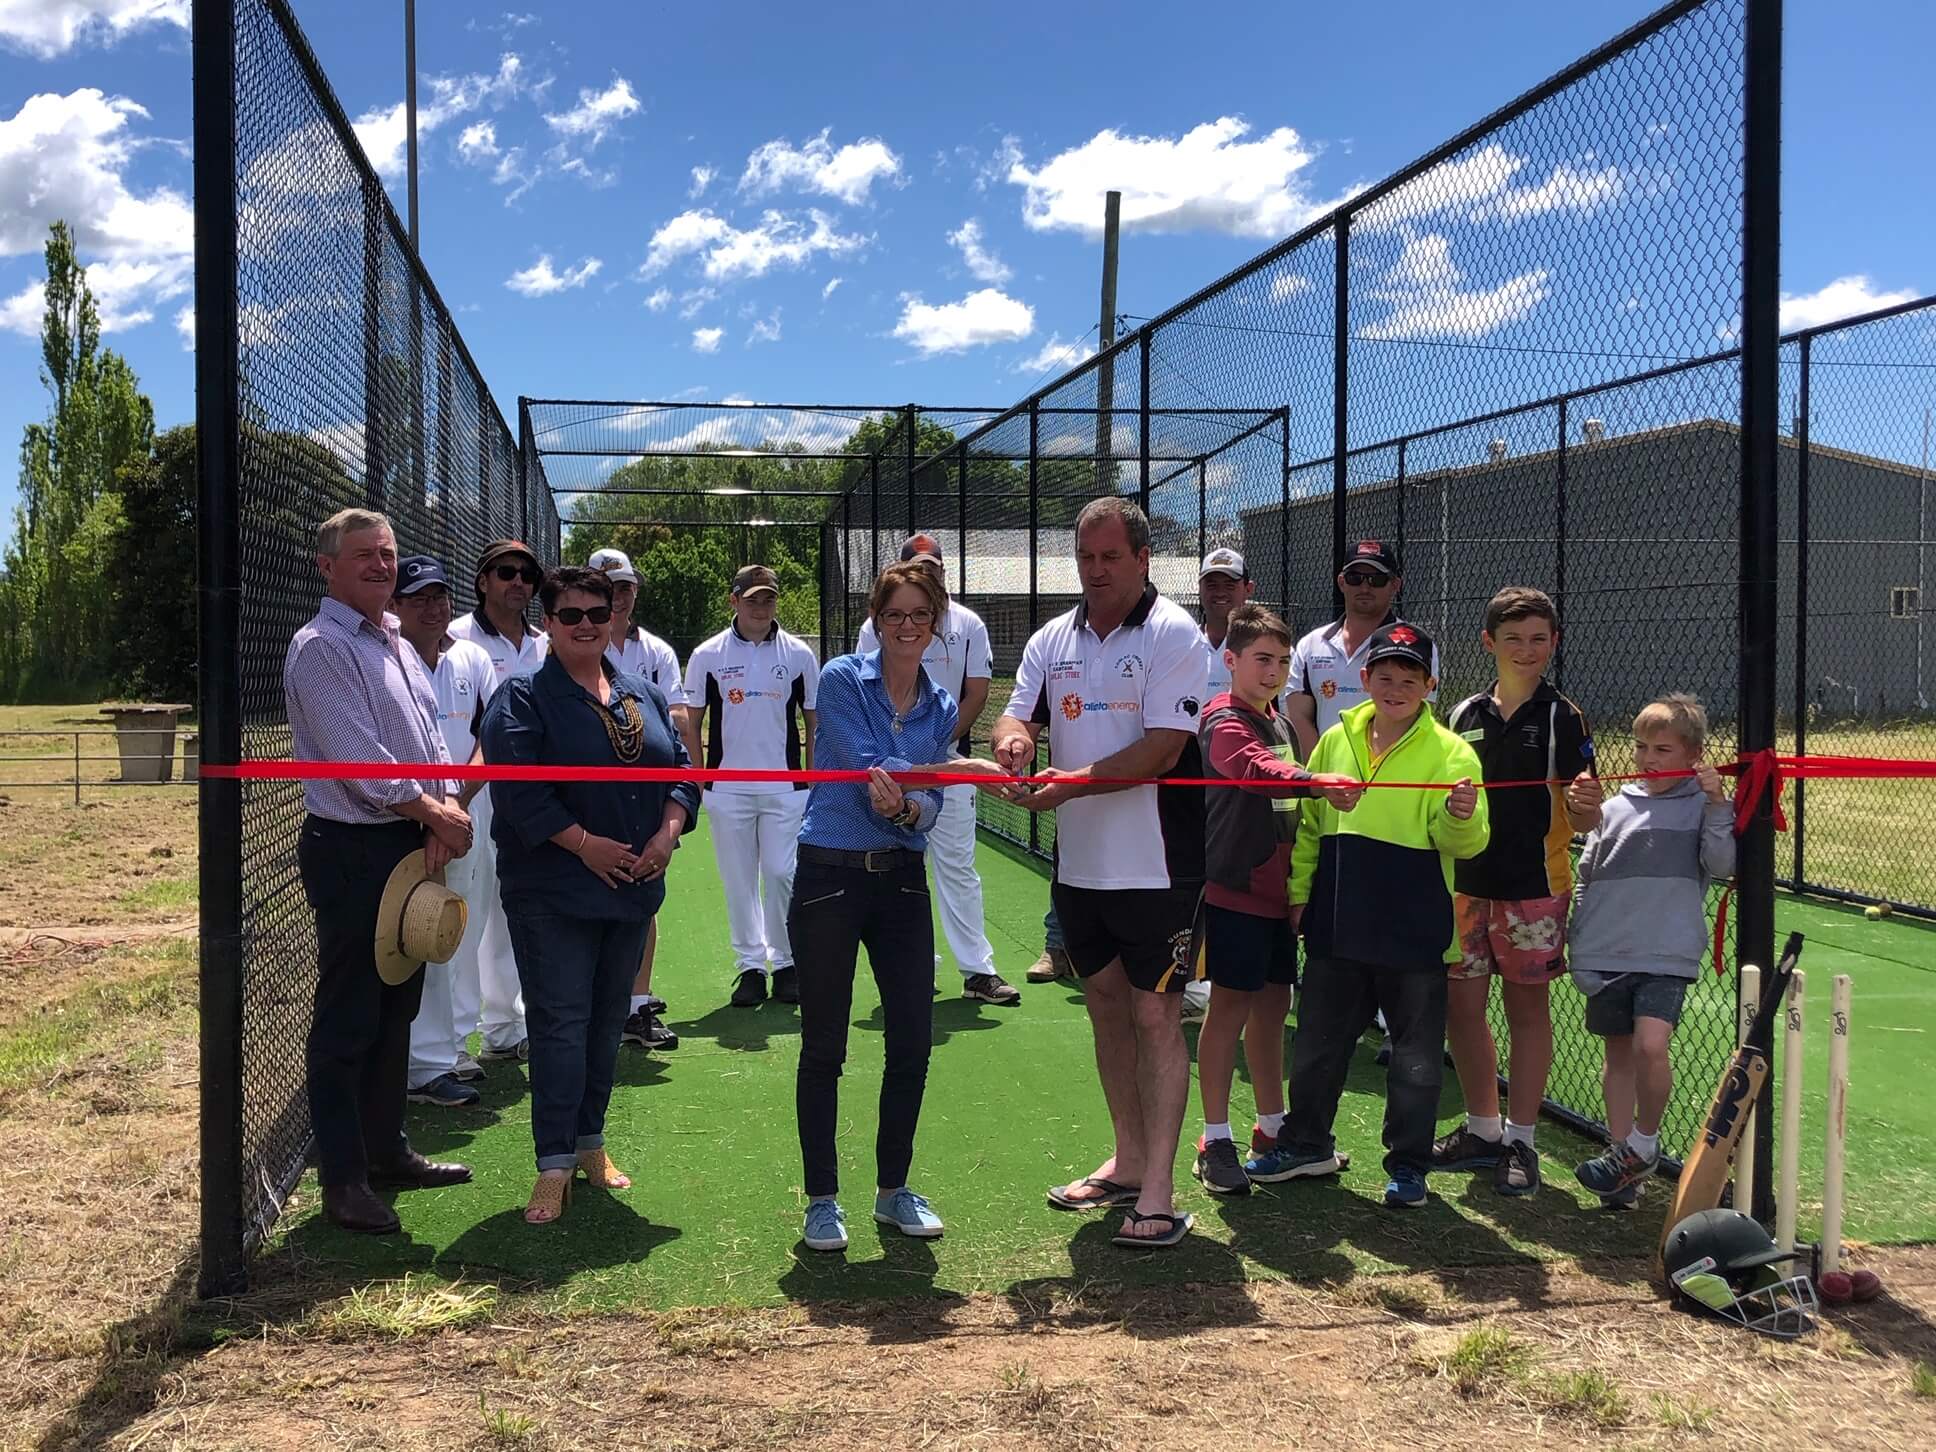 Steph Cooke stands in the new nets and cuts a red ribbon. Holding the ribbon is Andrew Scott who wears a white cricket polo shirt. Surrounding them are adults and children from the Coolac Cricket Club.